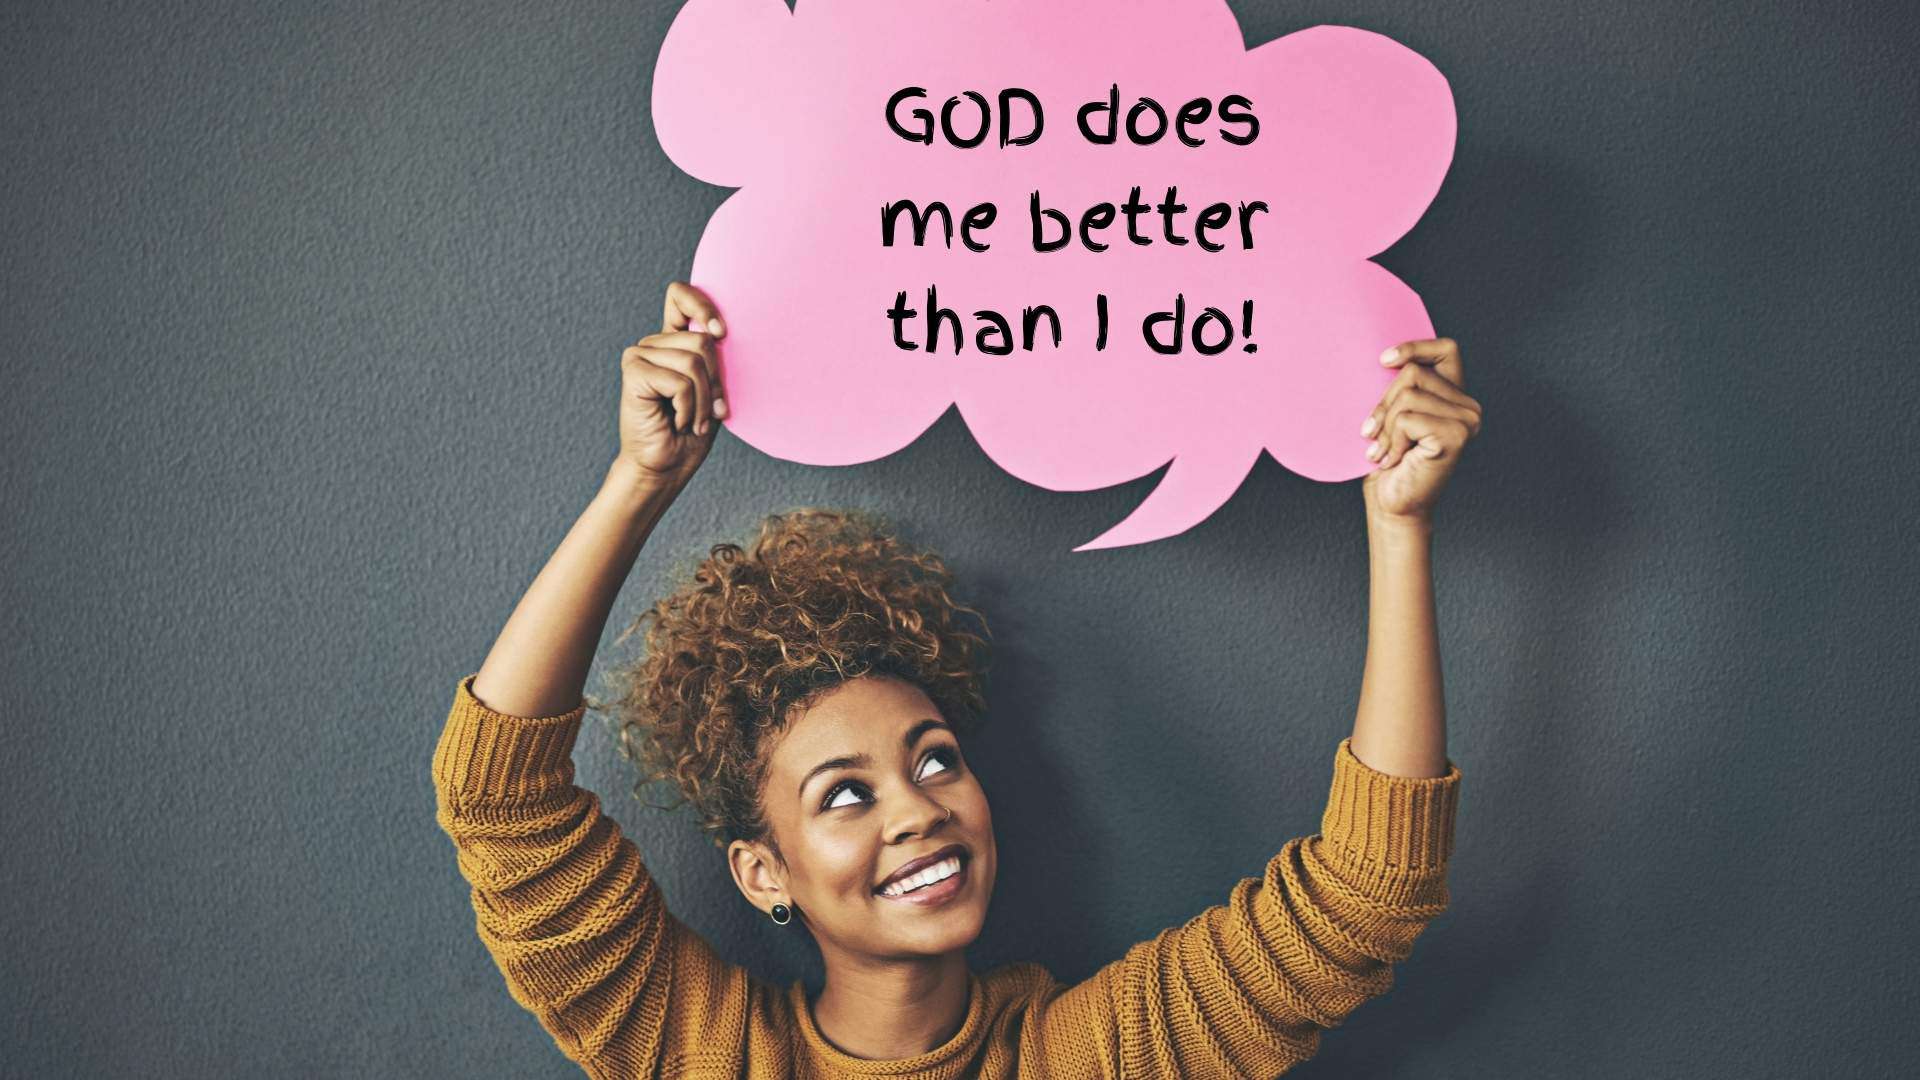 Black woman holding sign that says "God does me better than I do."